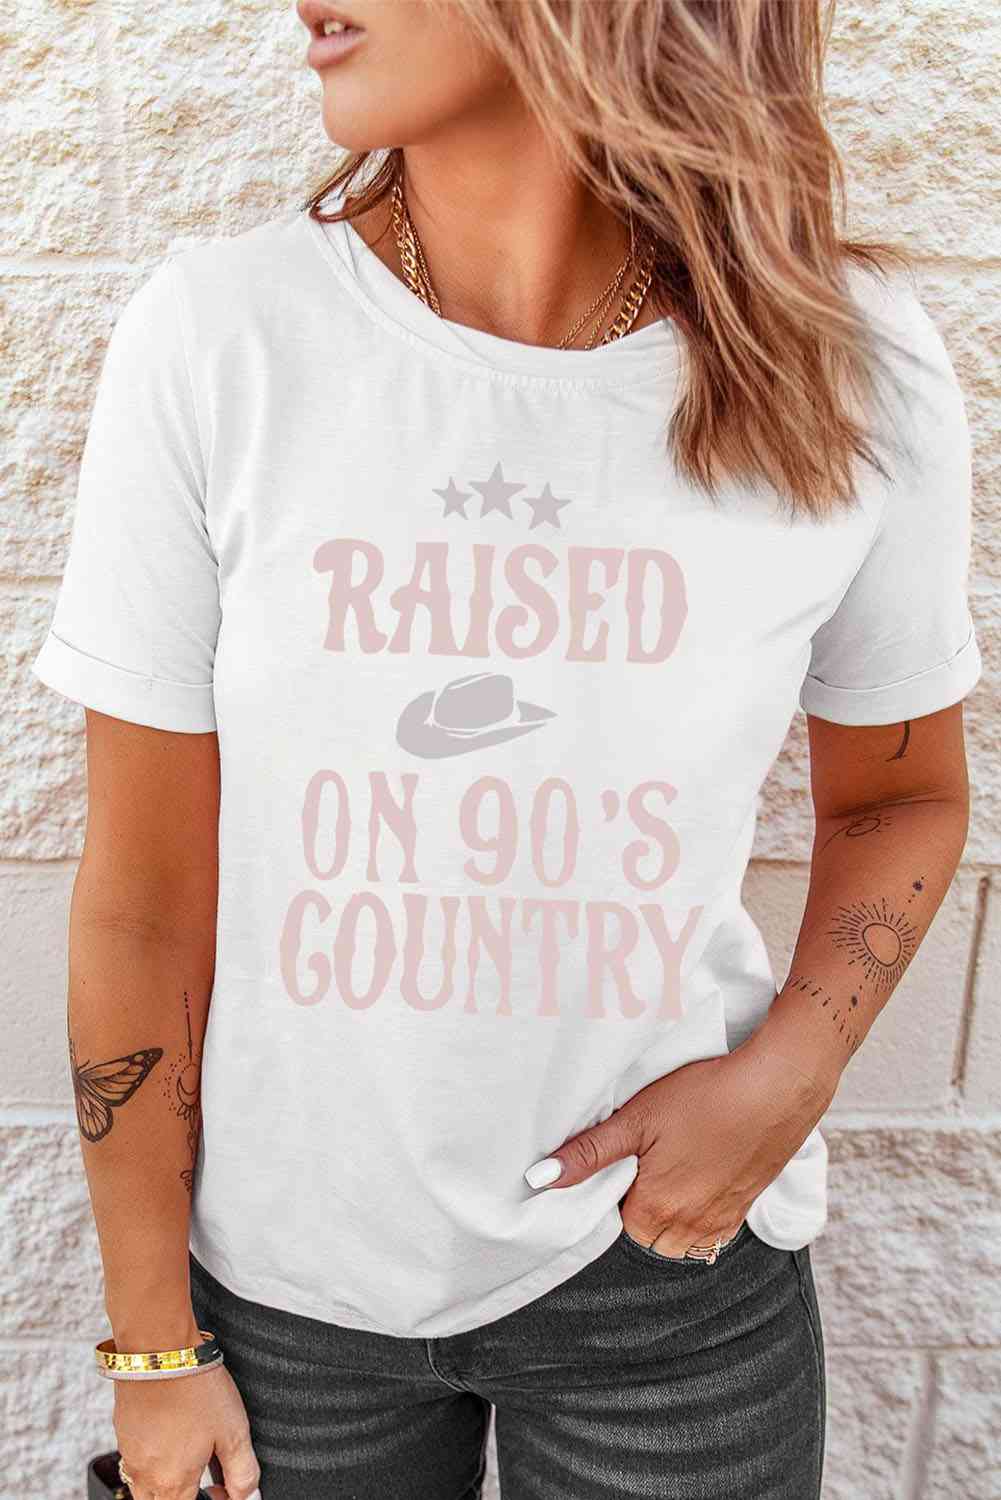 90’s Country Girl Letter Graphic Cuffed Tee